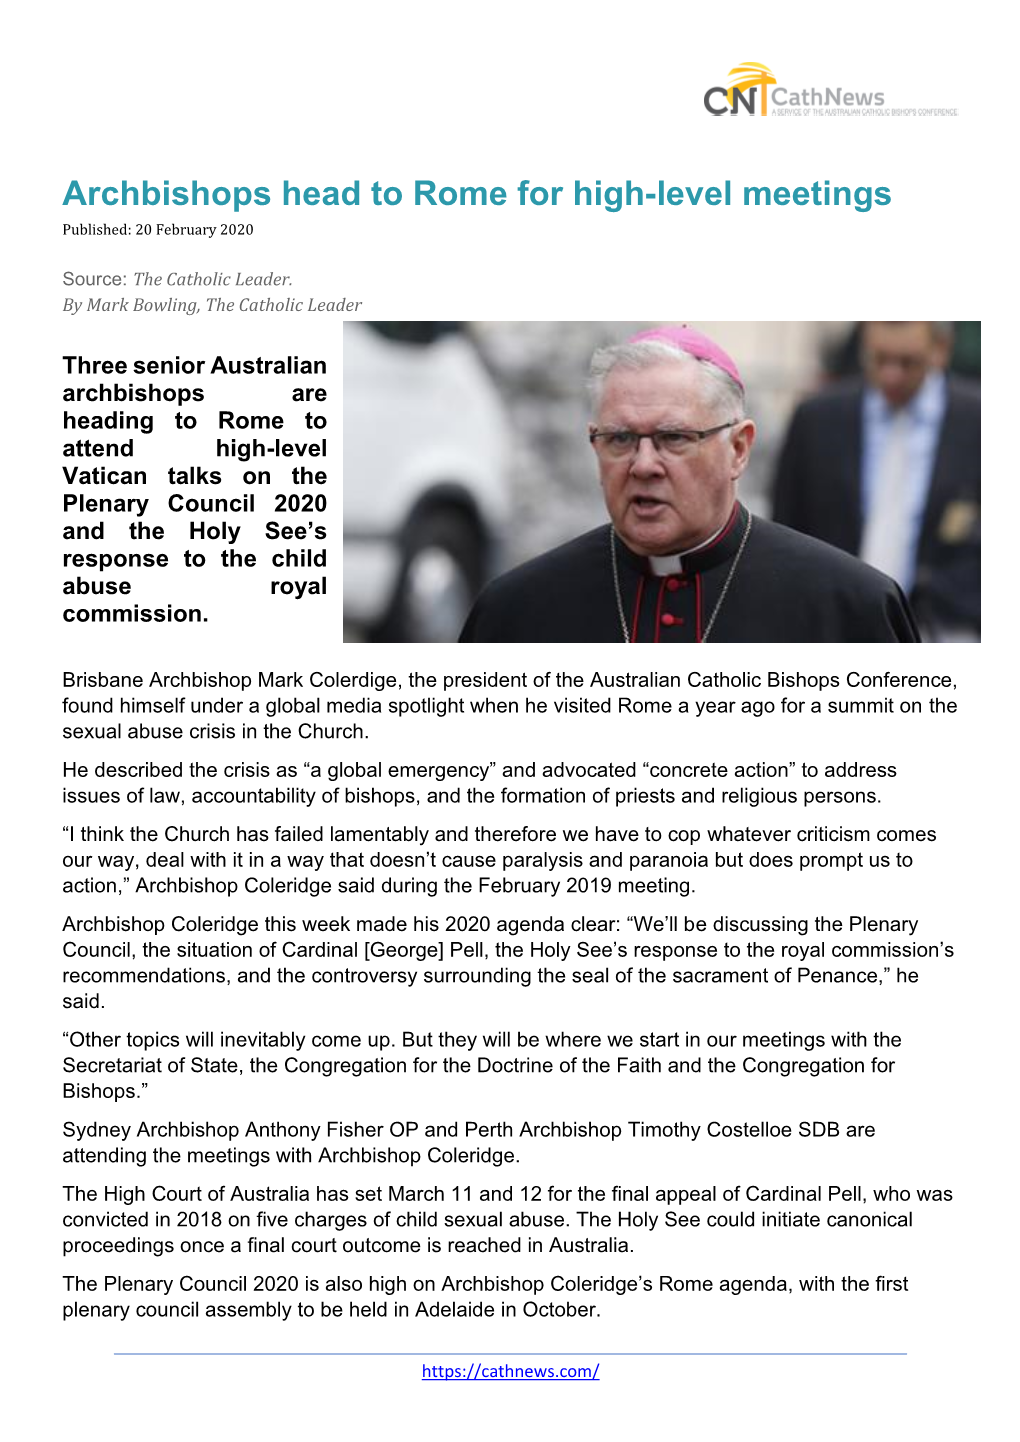 Archbishops Head to Rome for High-Level Meetings Published: 20 February 2020